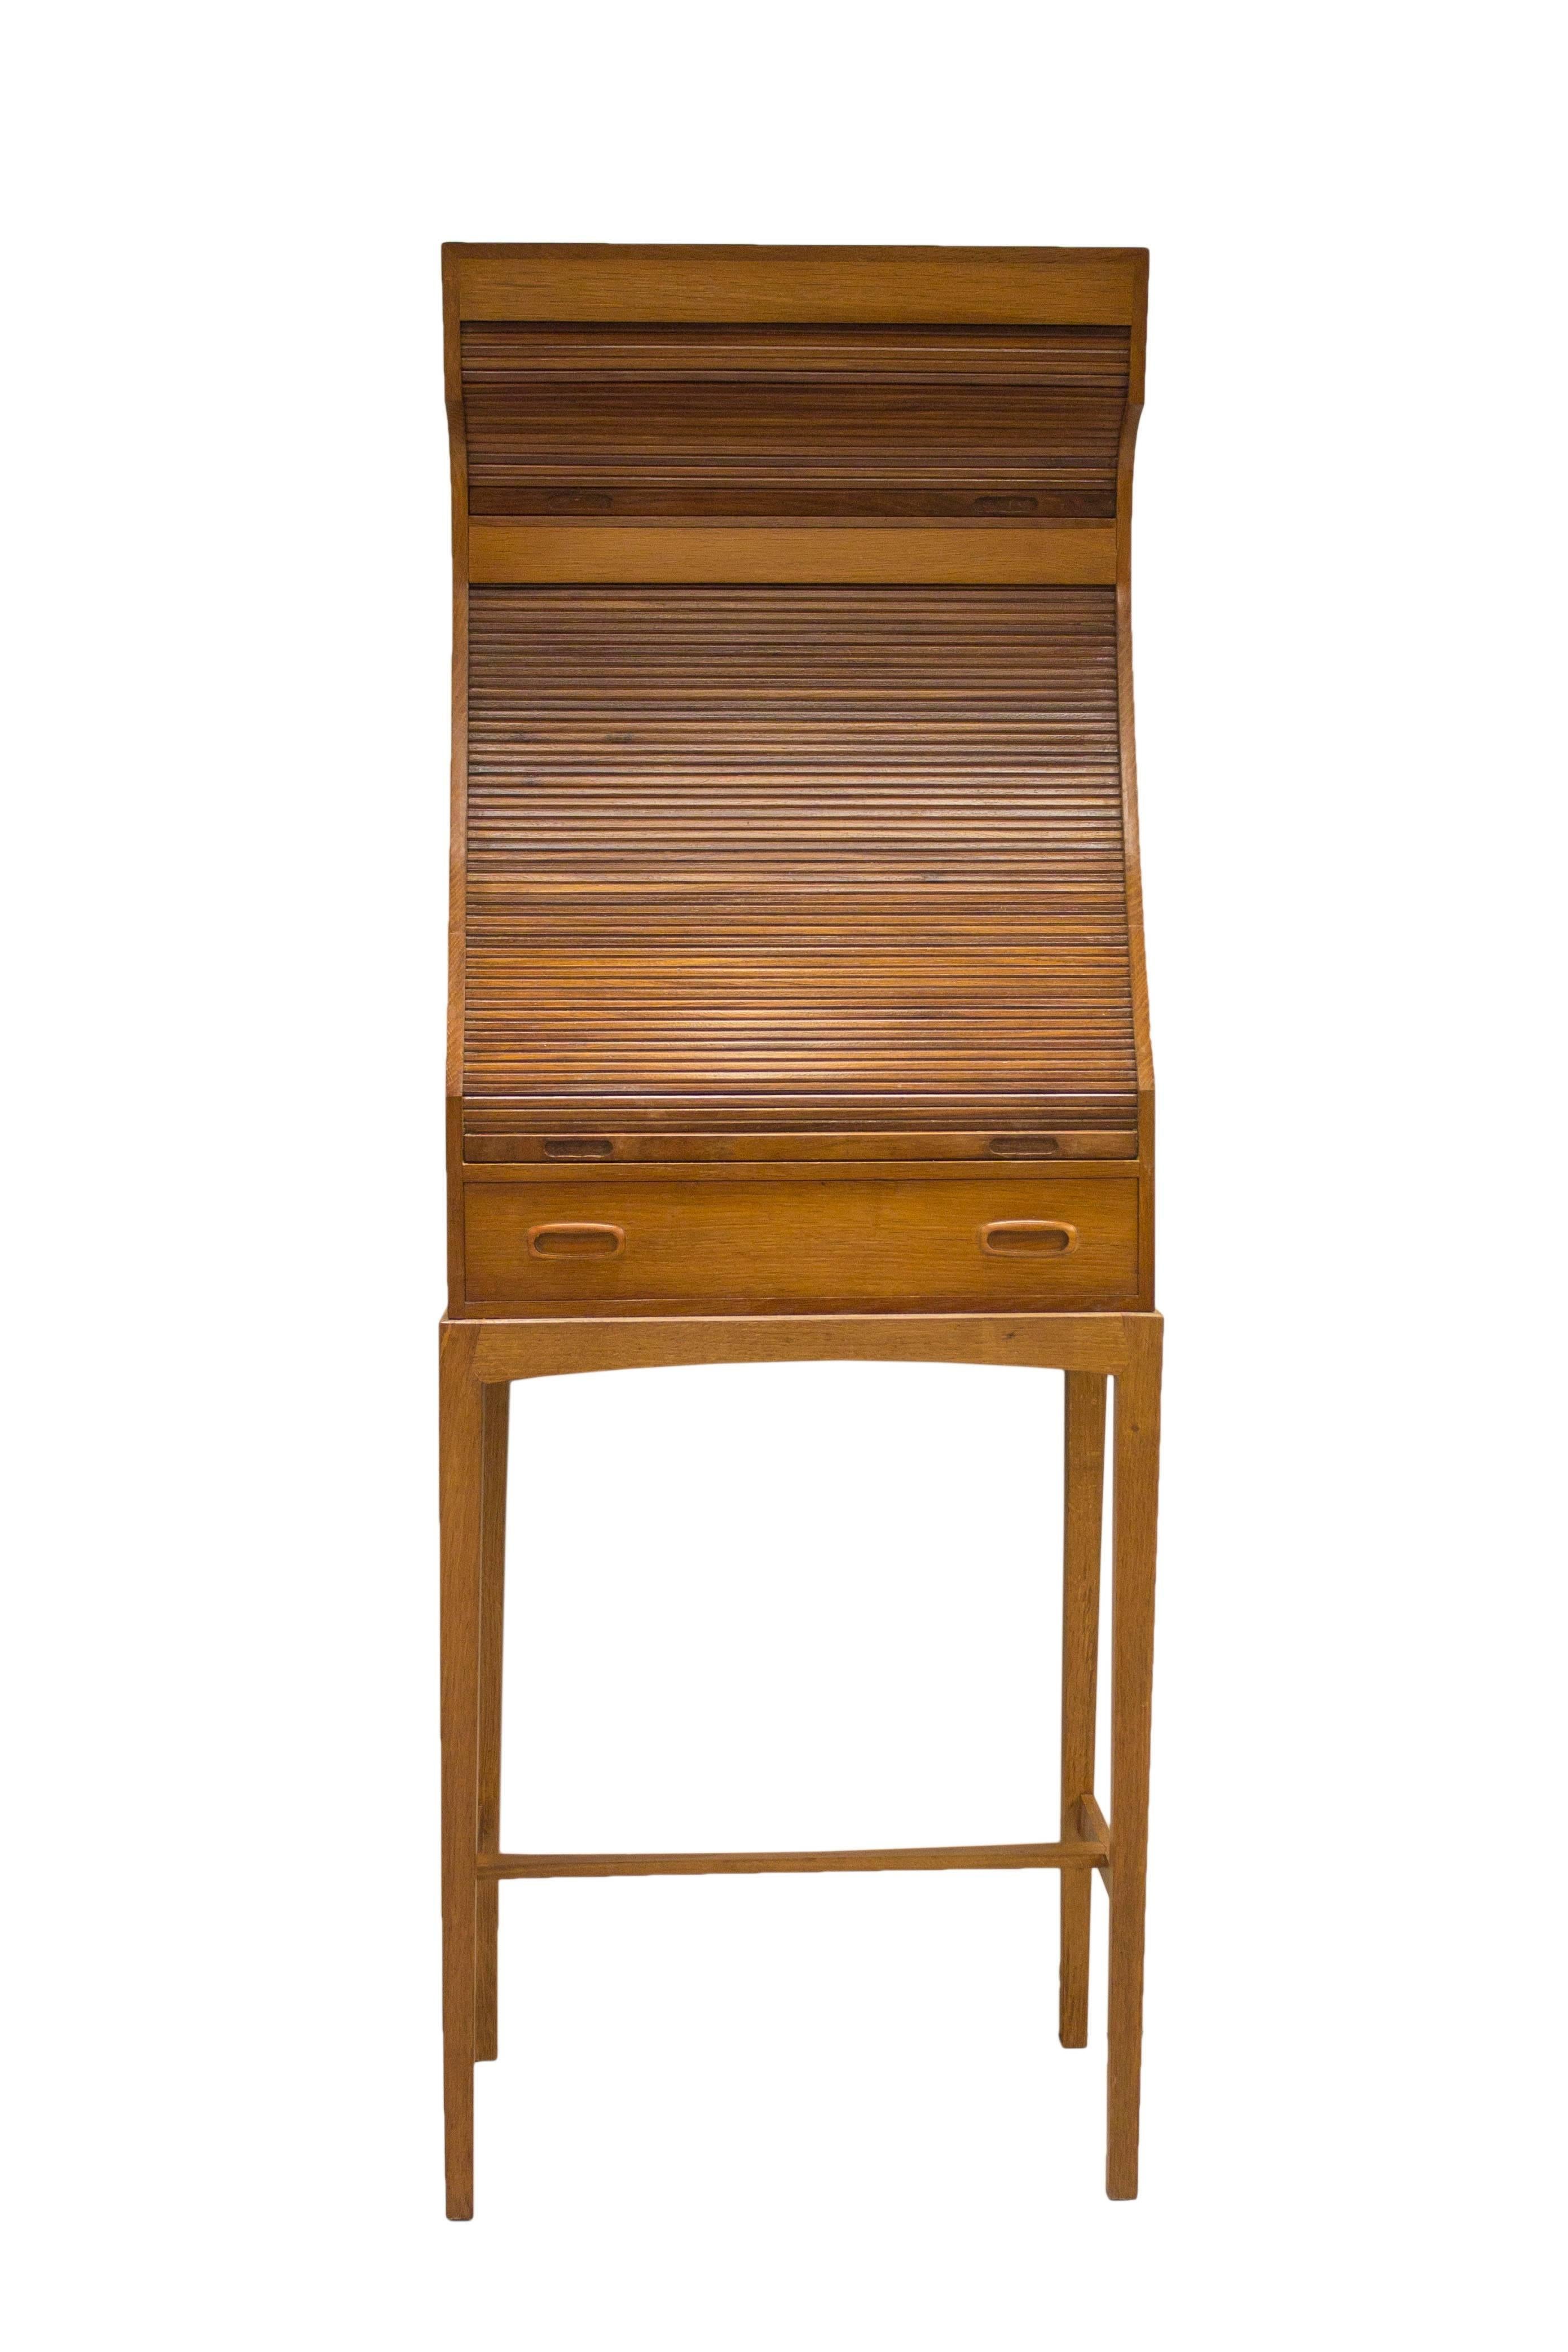 The Mid-Century movement saw a resurgence of pieces using Tambour door techniques to create stunning and practical furniture.

This wonderful piece in excellent refinished condition features two storage sections both concealed behind upward